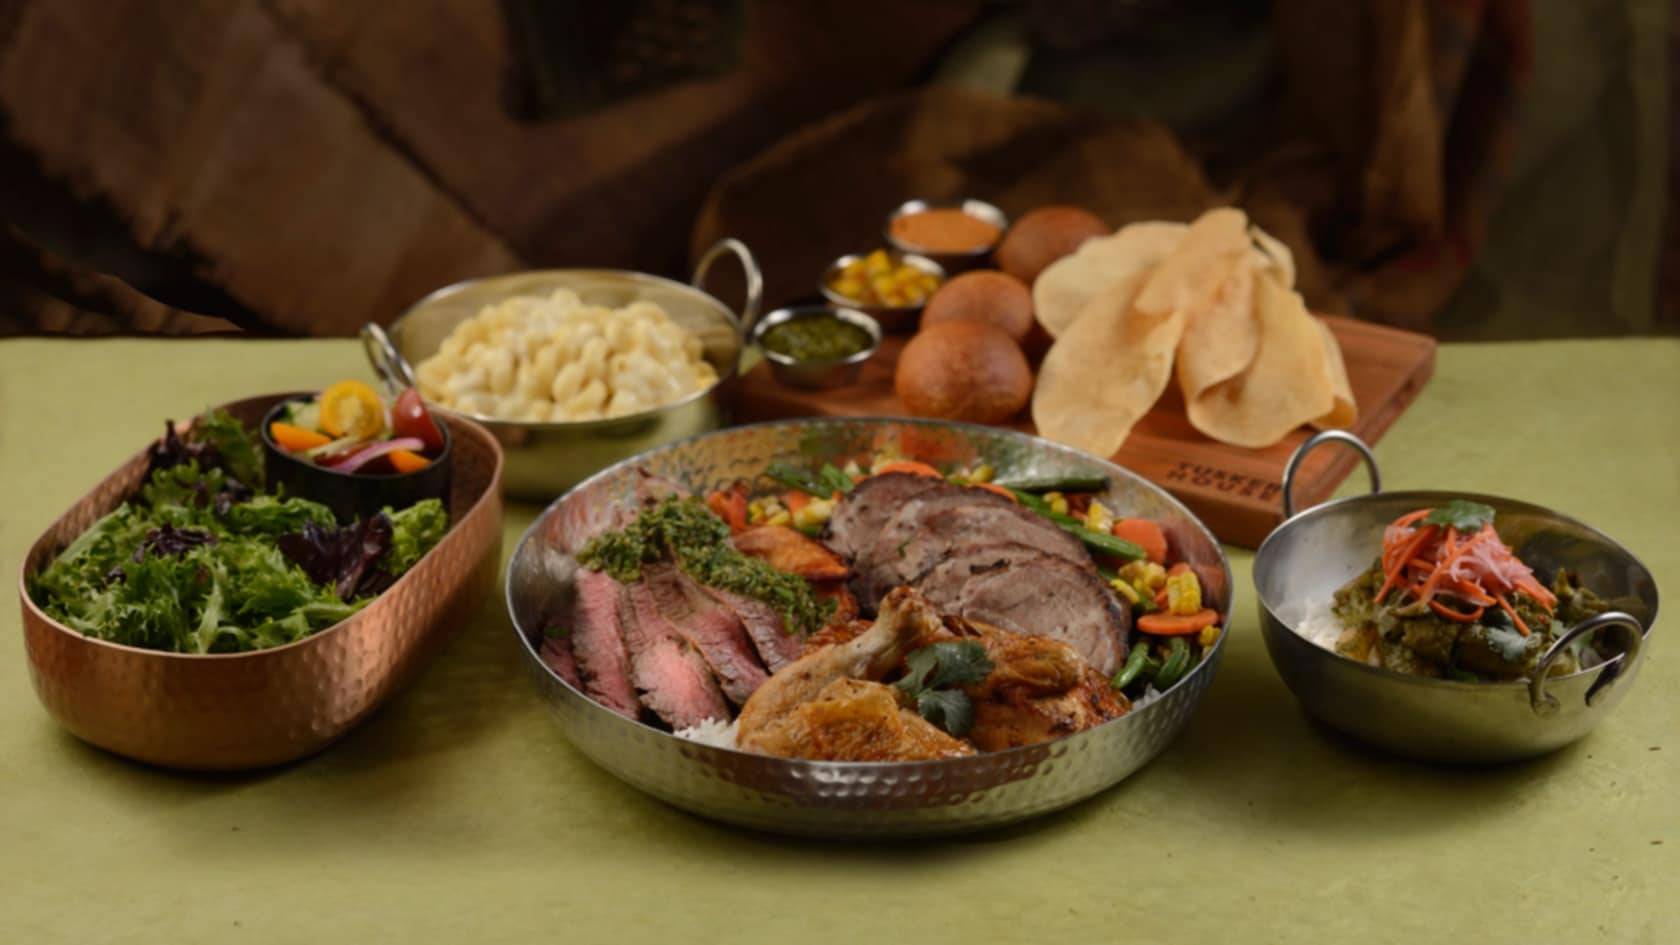 Full menu and pricing for breakfast, lunch and dinner at the soon-to-reopen Tusker House at Disney's Animal Kingdom